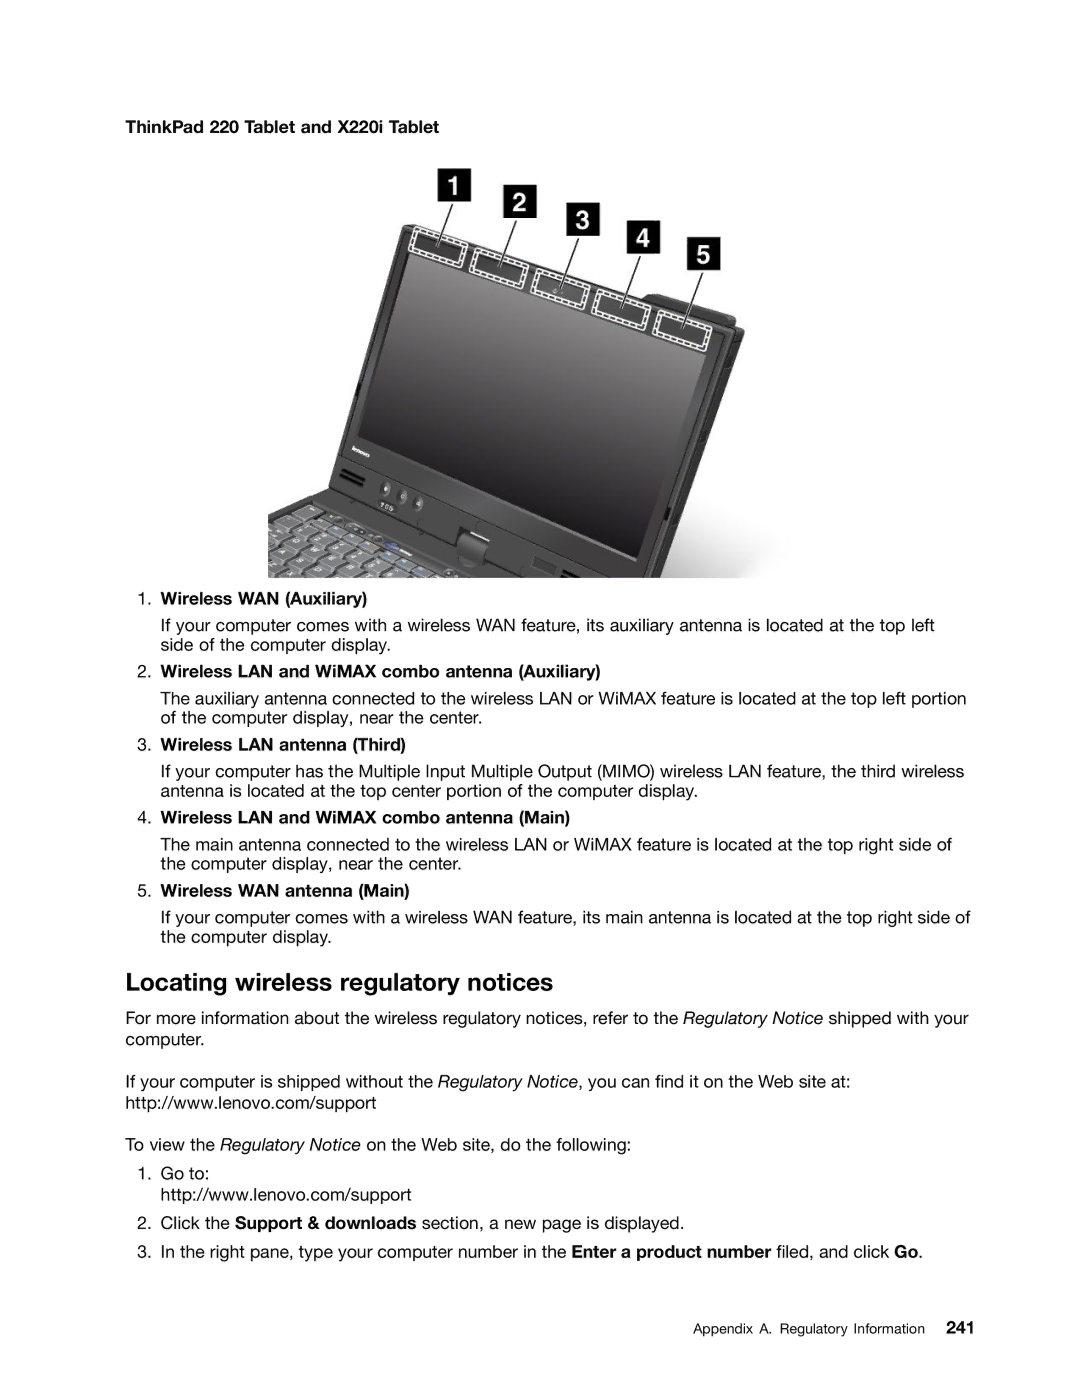 Lenovo 429040 manual Locating wireless regulatory notices, ThinkPad 220 Tablet and X220i Tablet Wireless WAN Auxiliary 